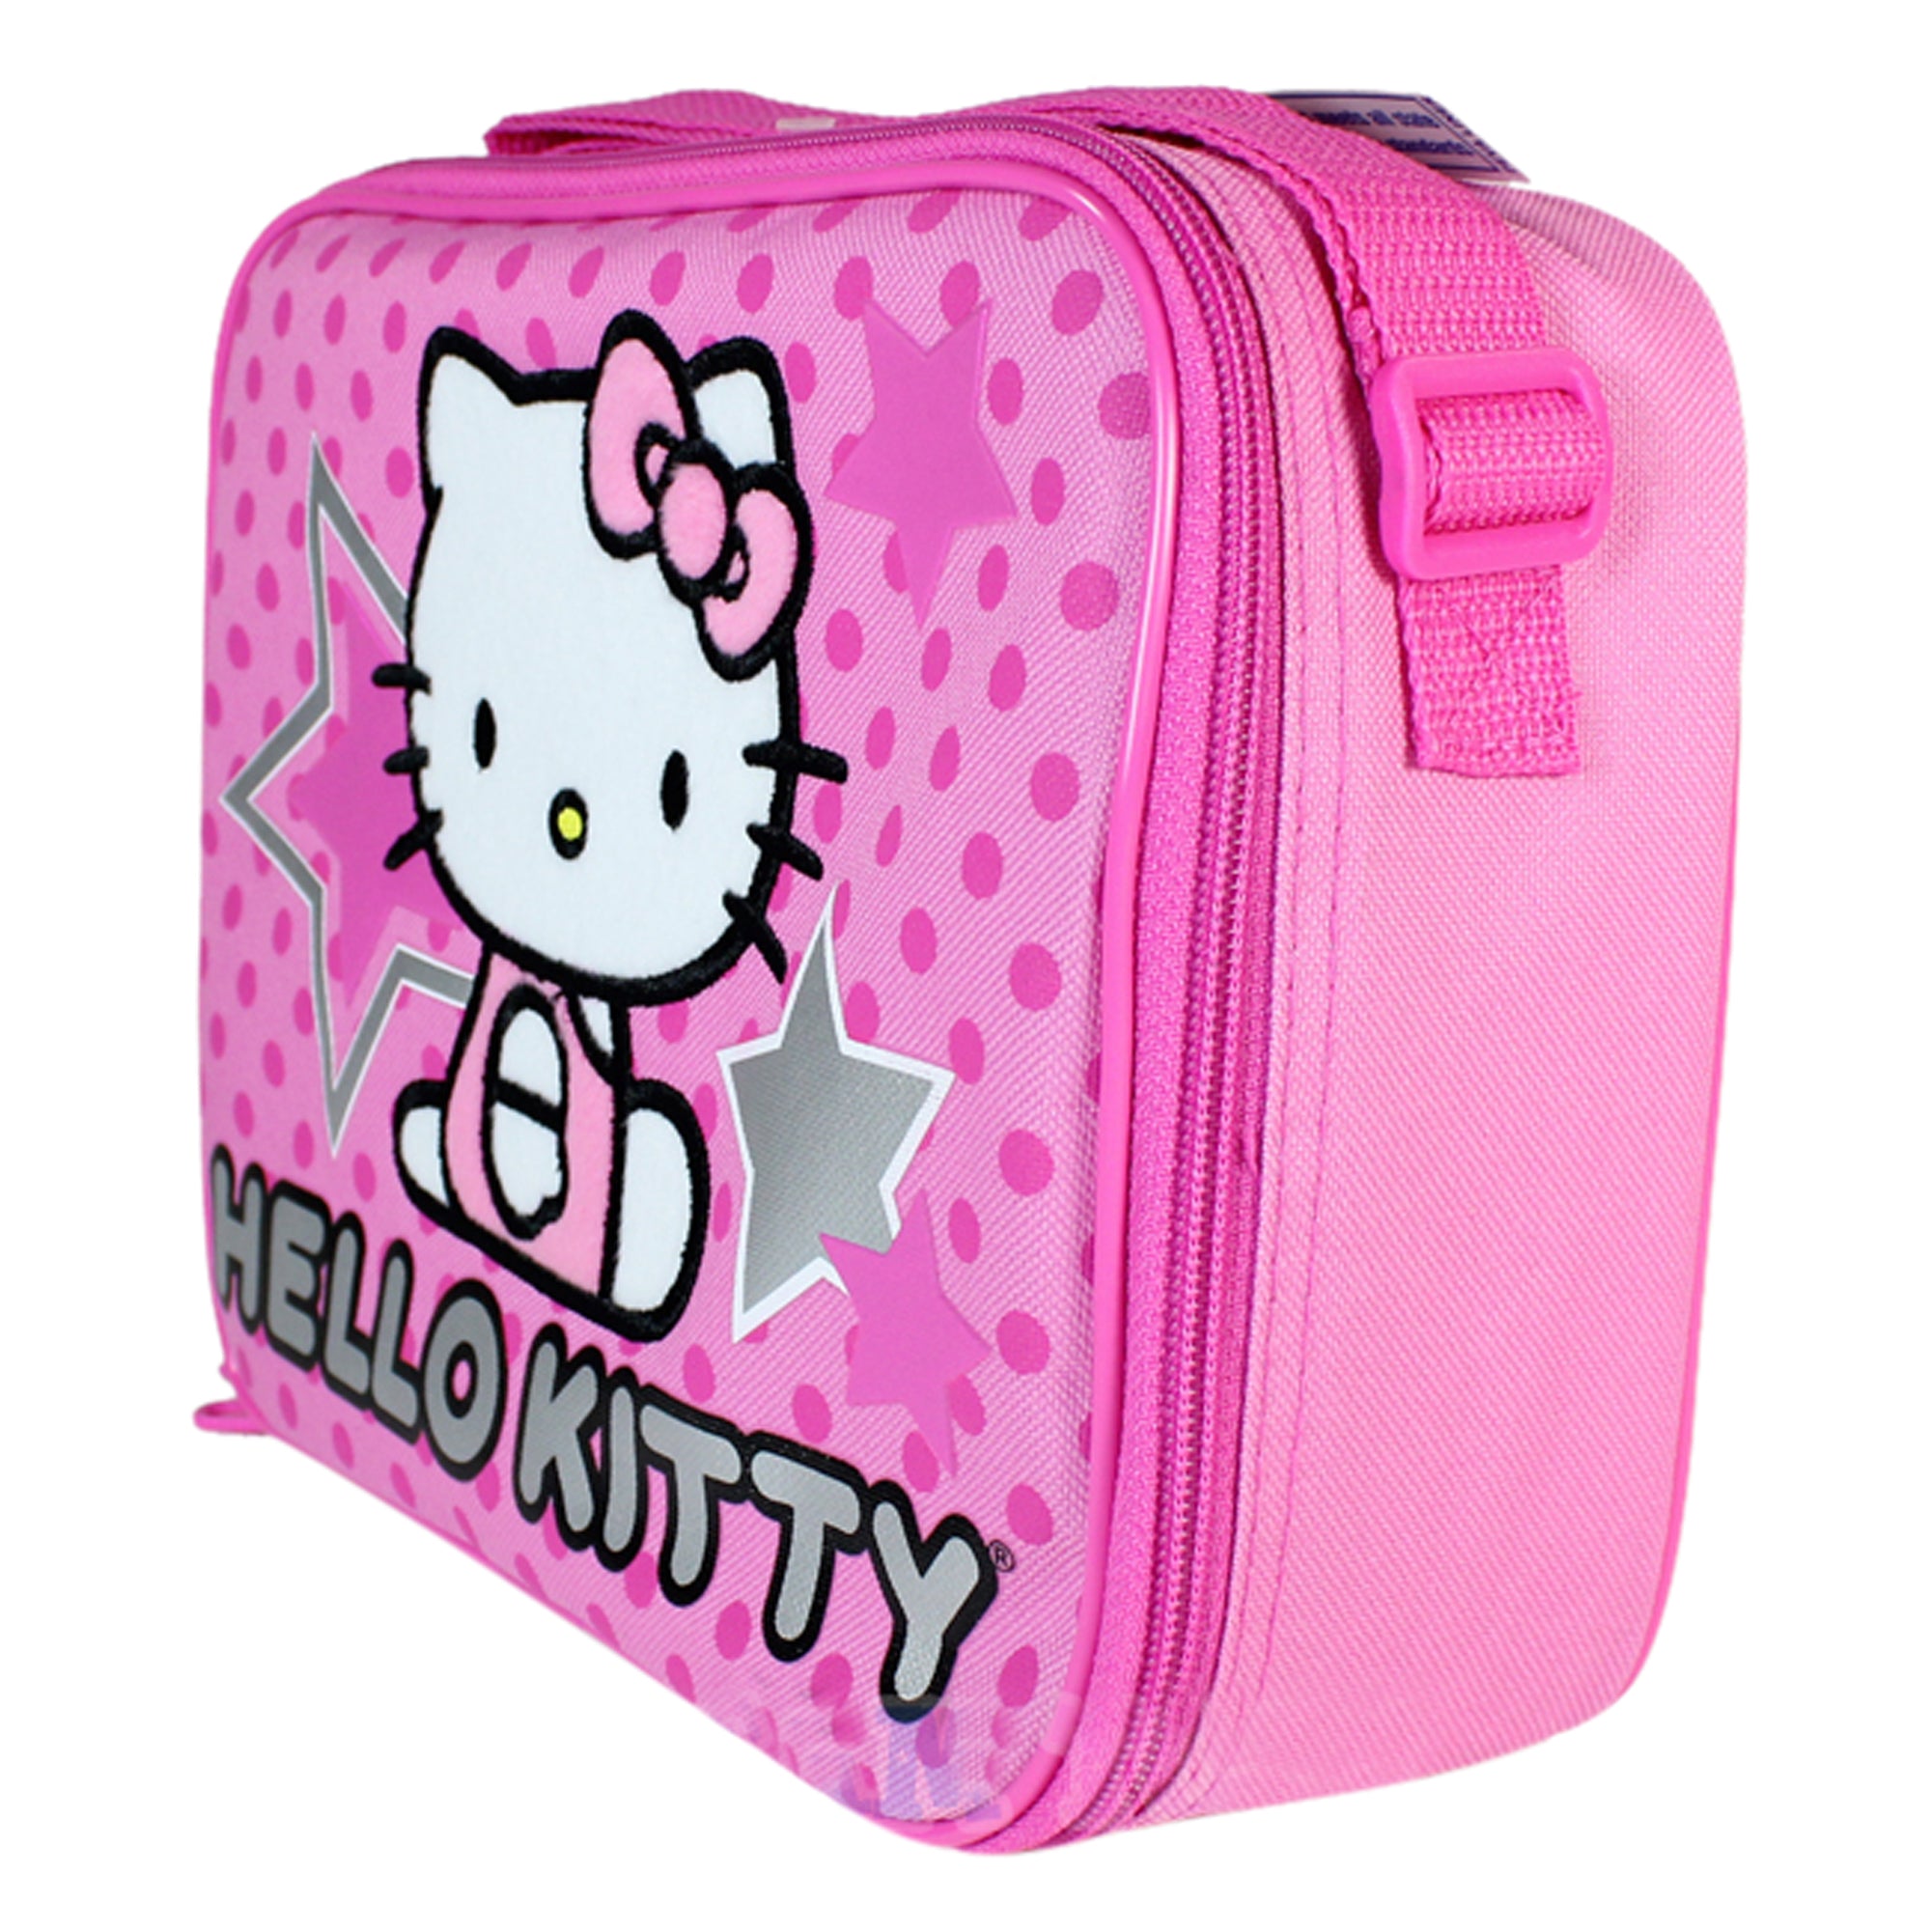 Lunch Bag - Hello Kitty - Pink Star and Dots New Case Girls Gifts Licensed 81401 - image 4 of 4